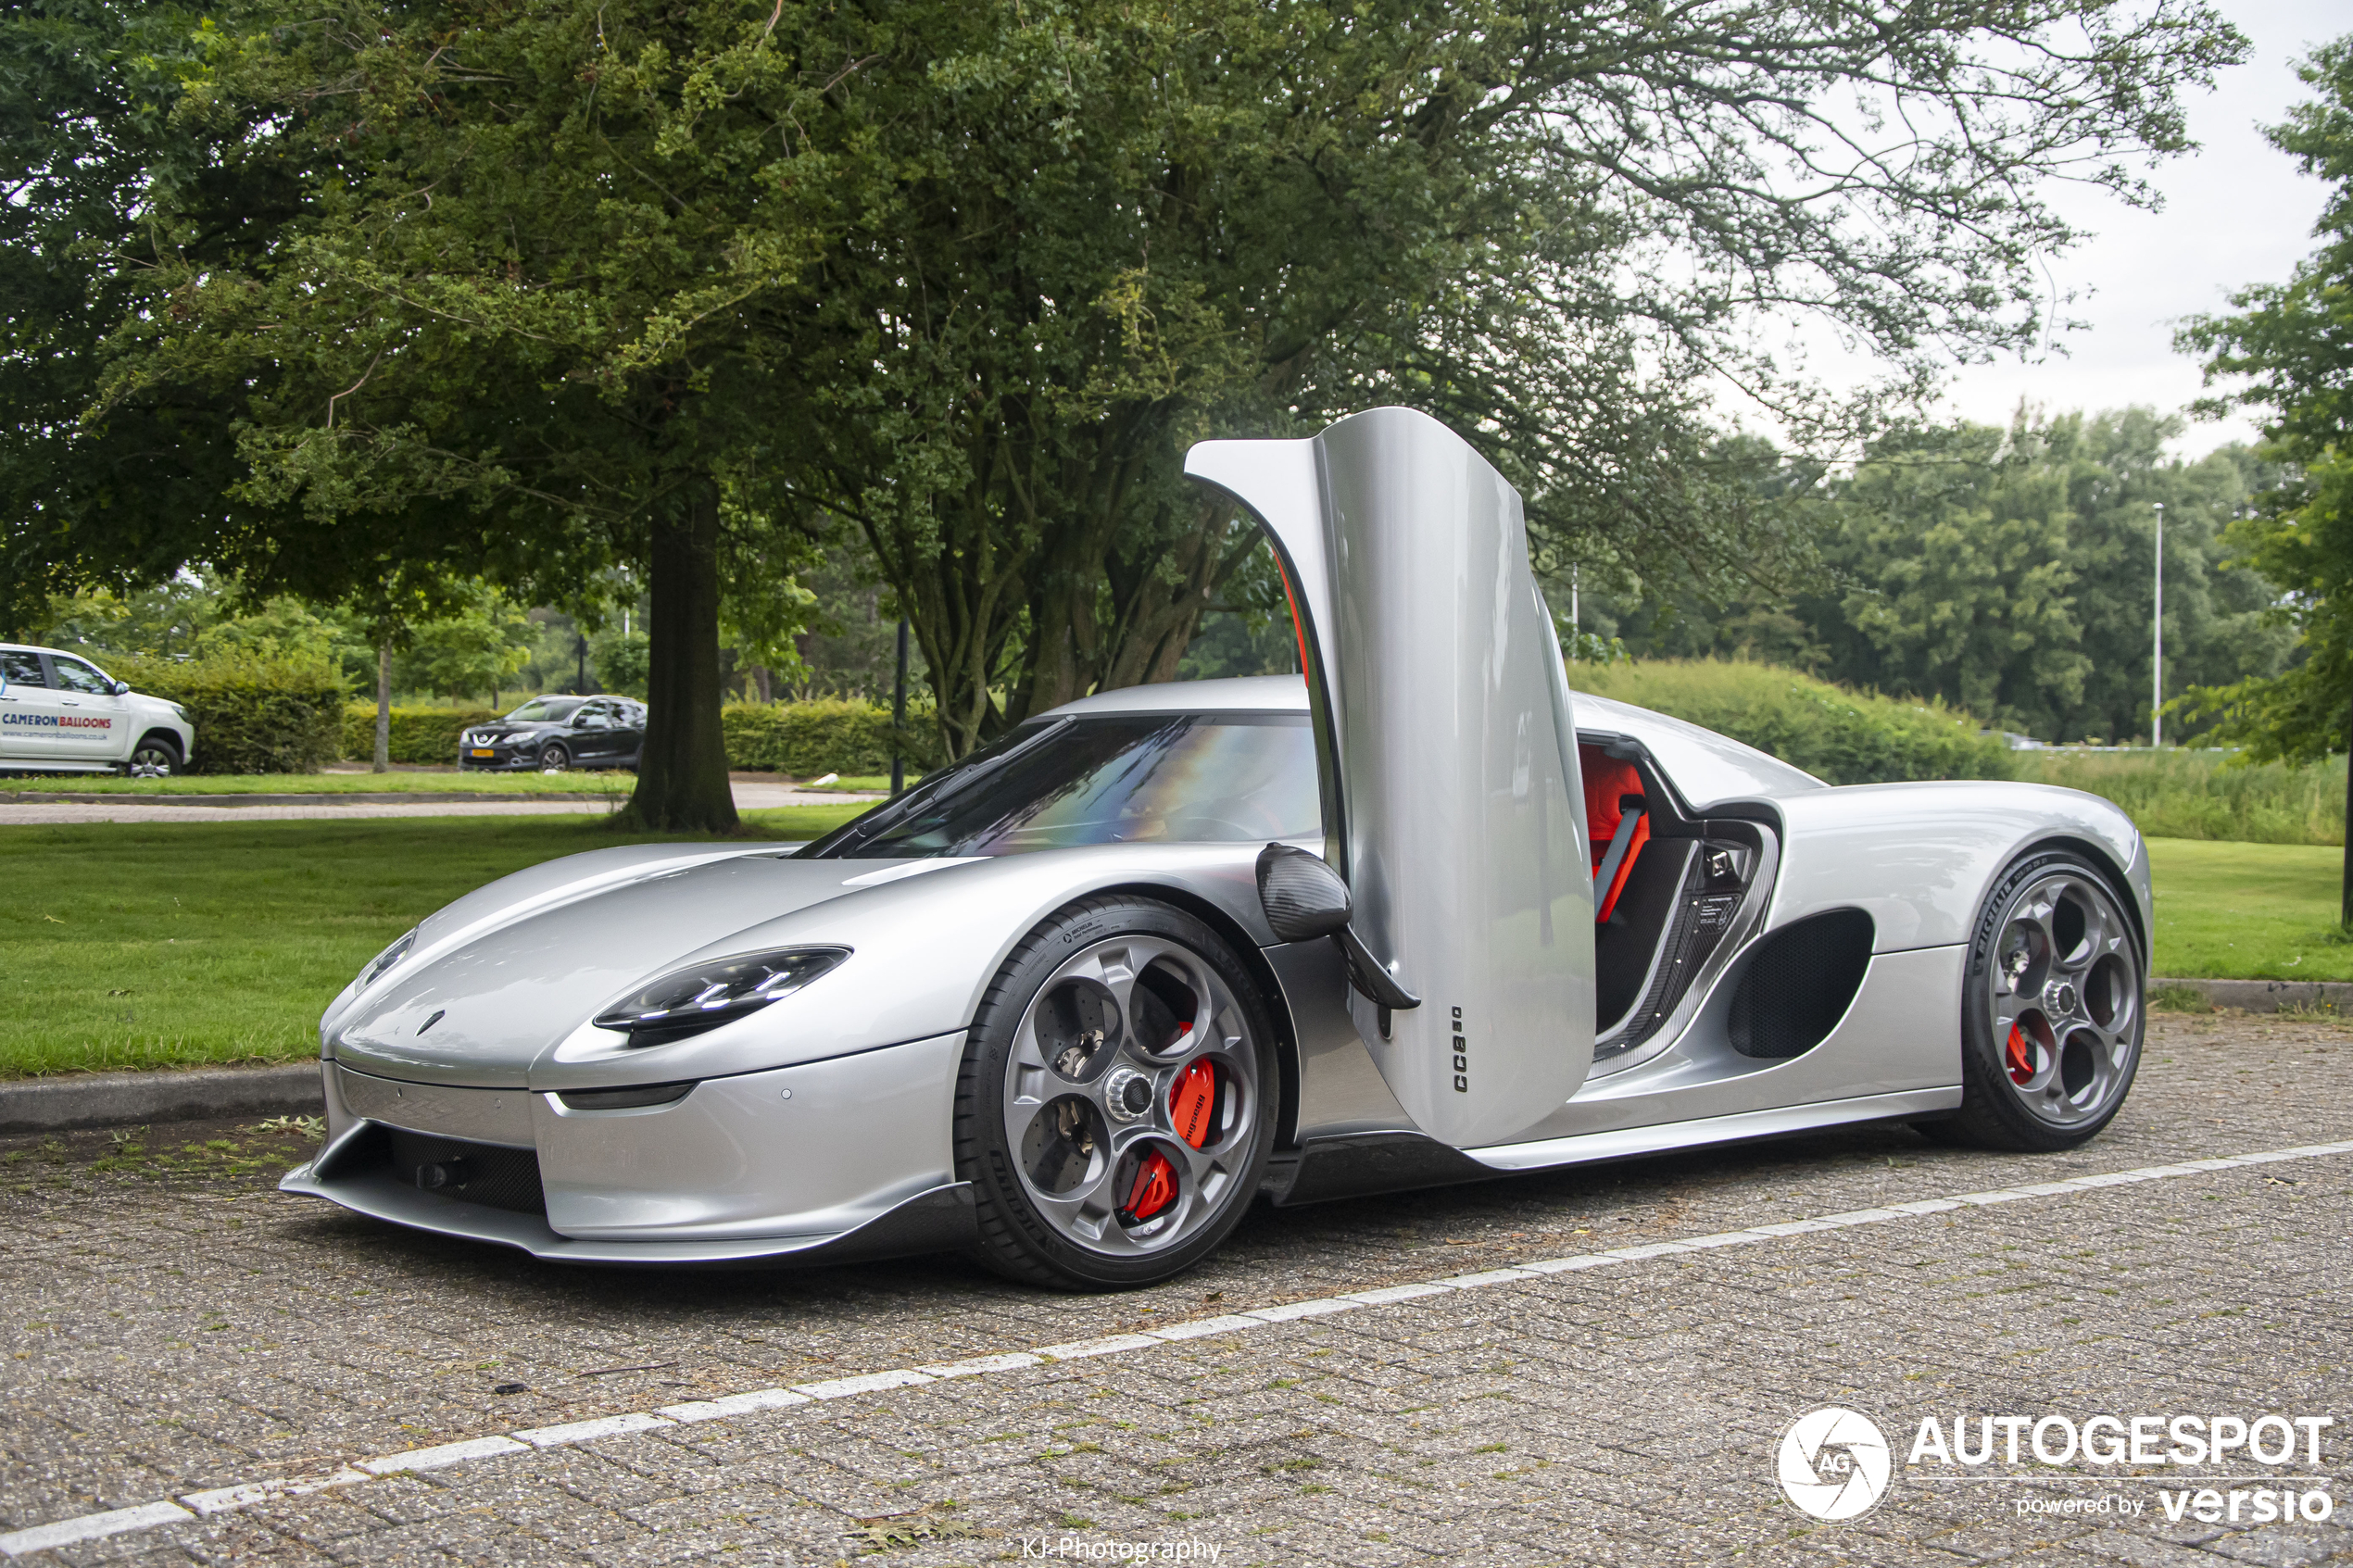 A Koenigsegg CC850 shows up in the netherlands